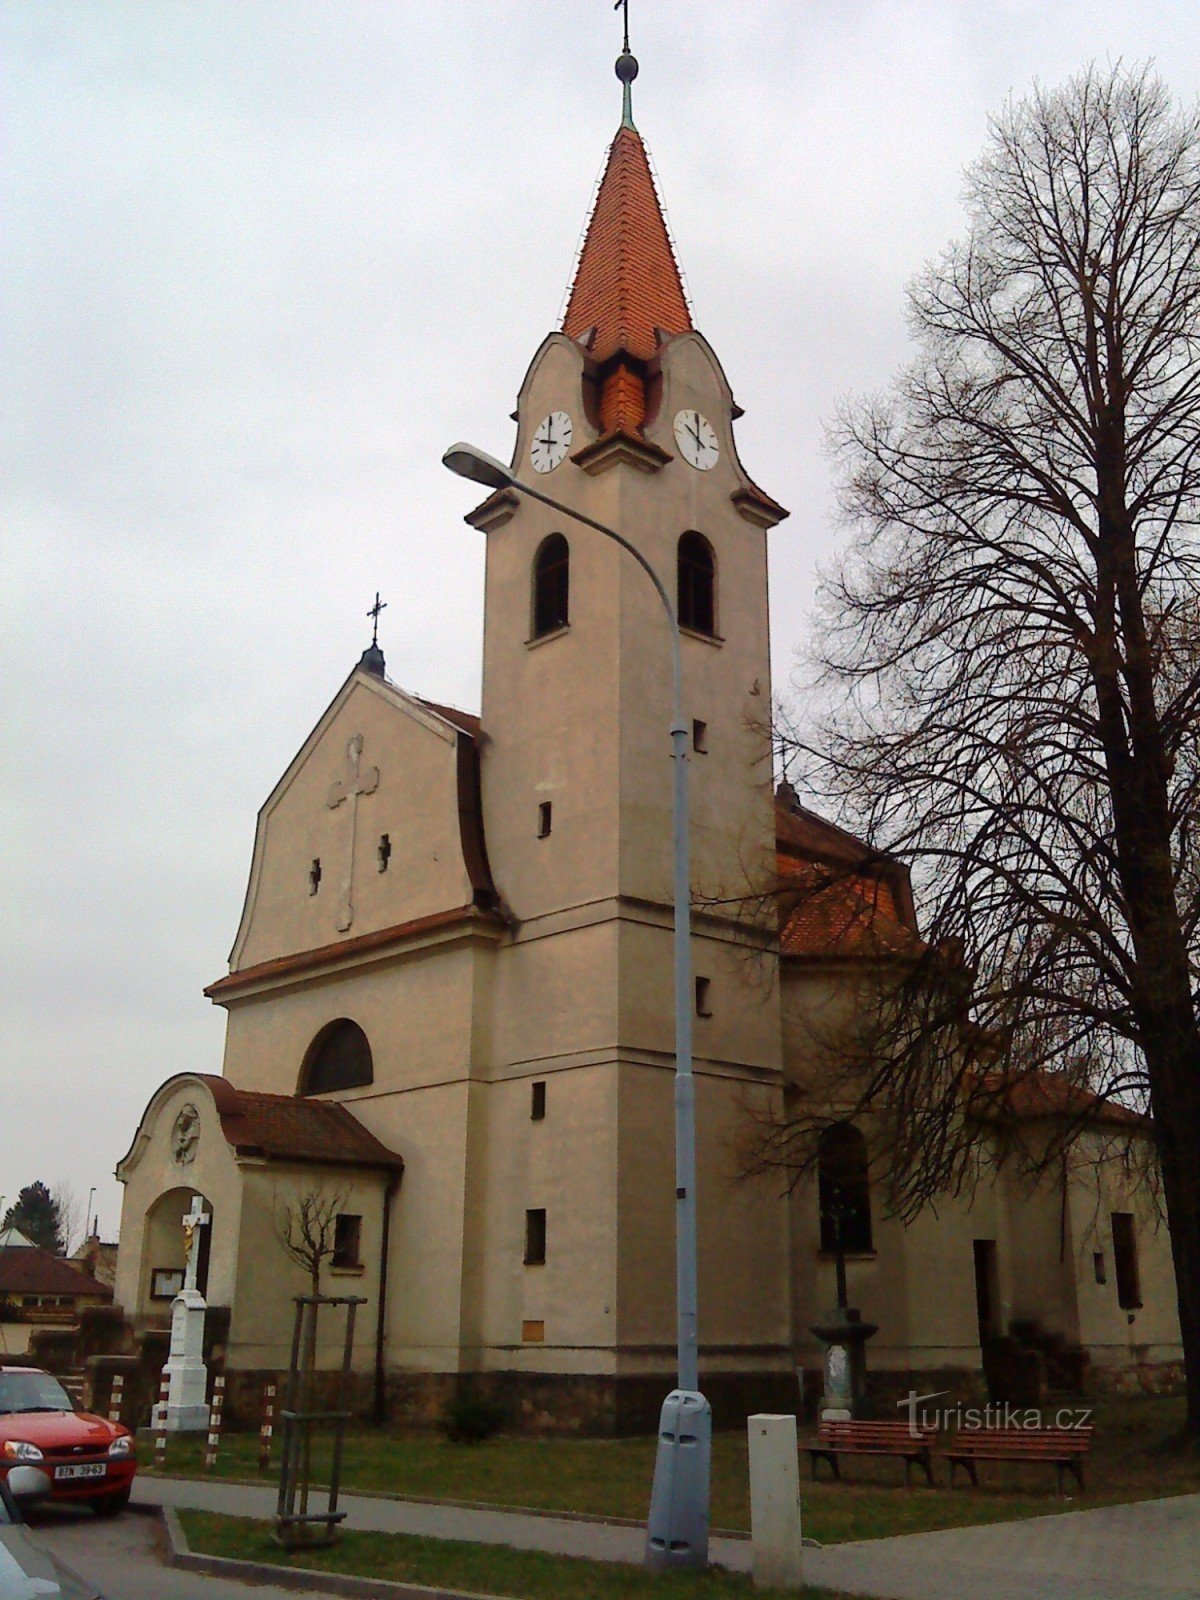 Church of St. Klement Maria Hofbauer in Brno